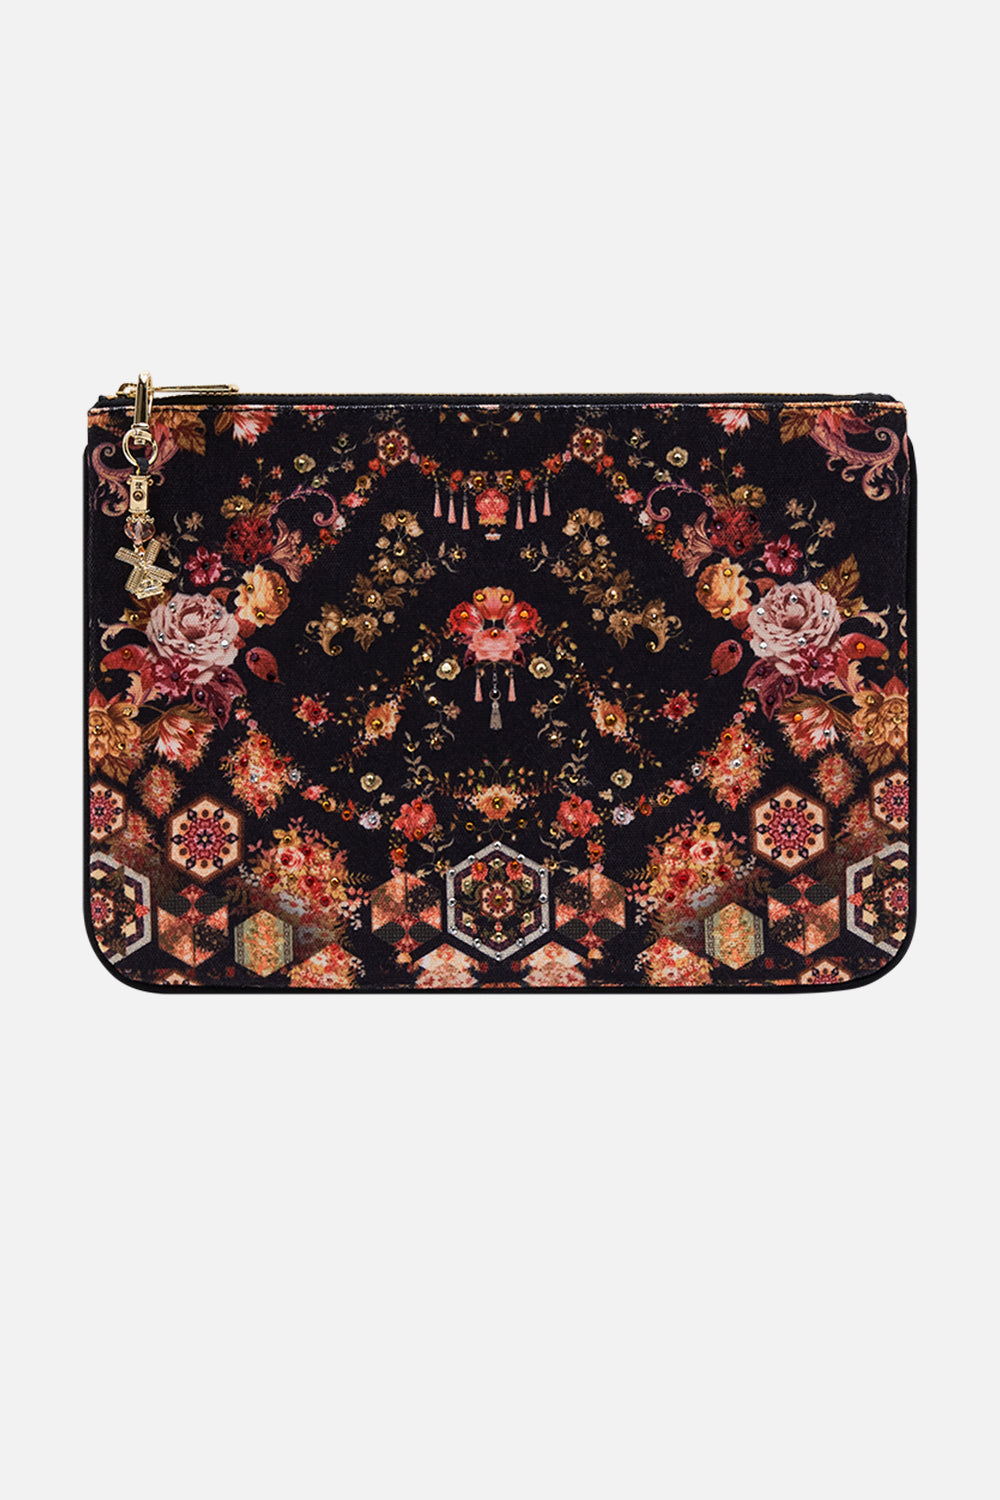 CAMILLA Floral Small Canvas Clutch in Stitched in Time